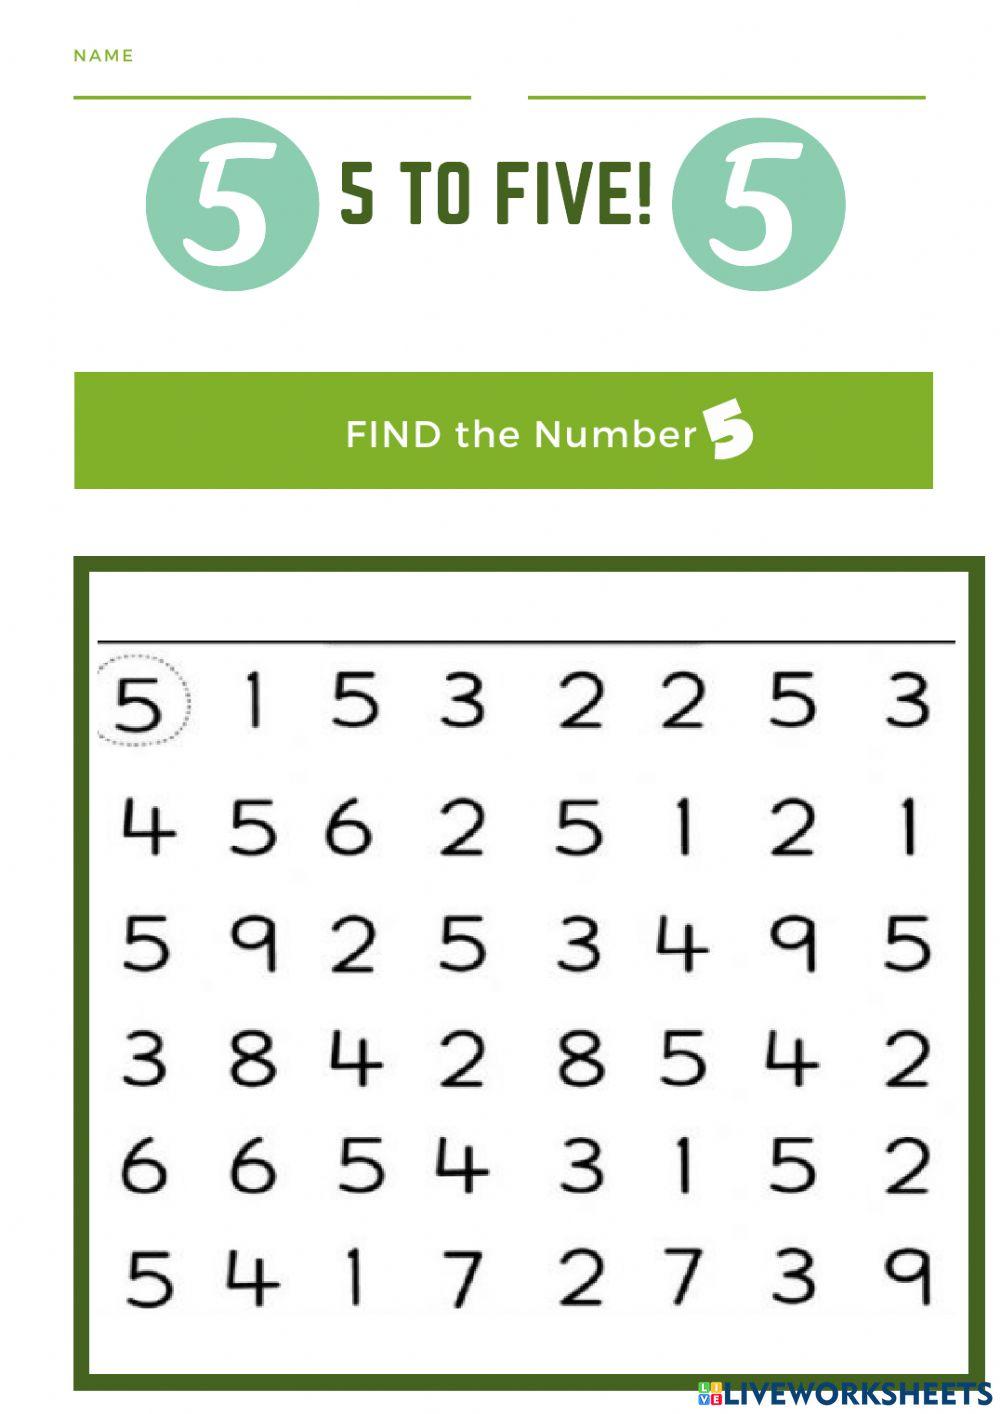 Finding the number 5